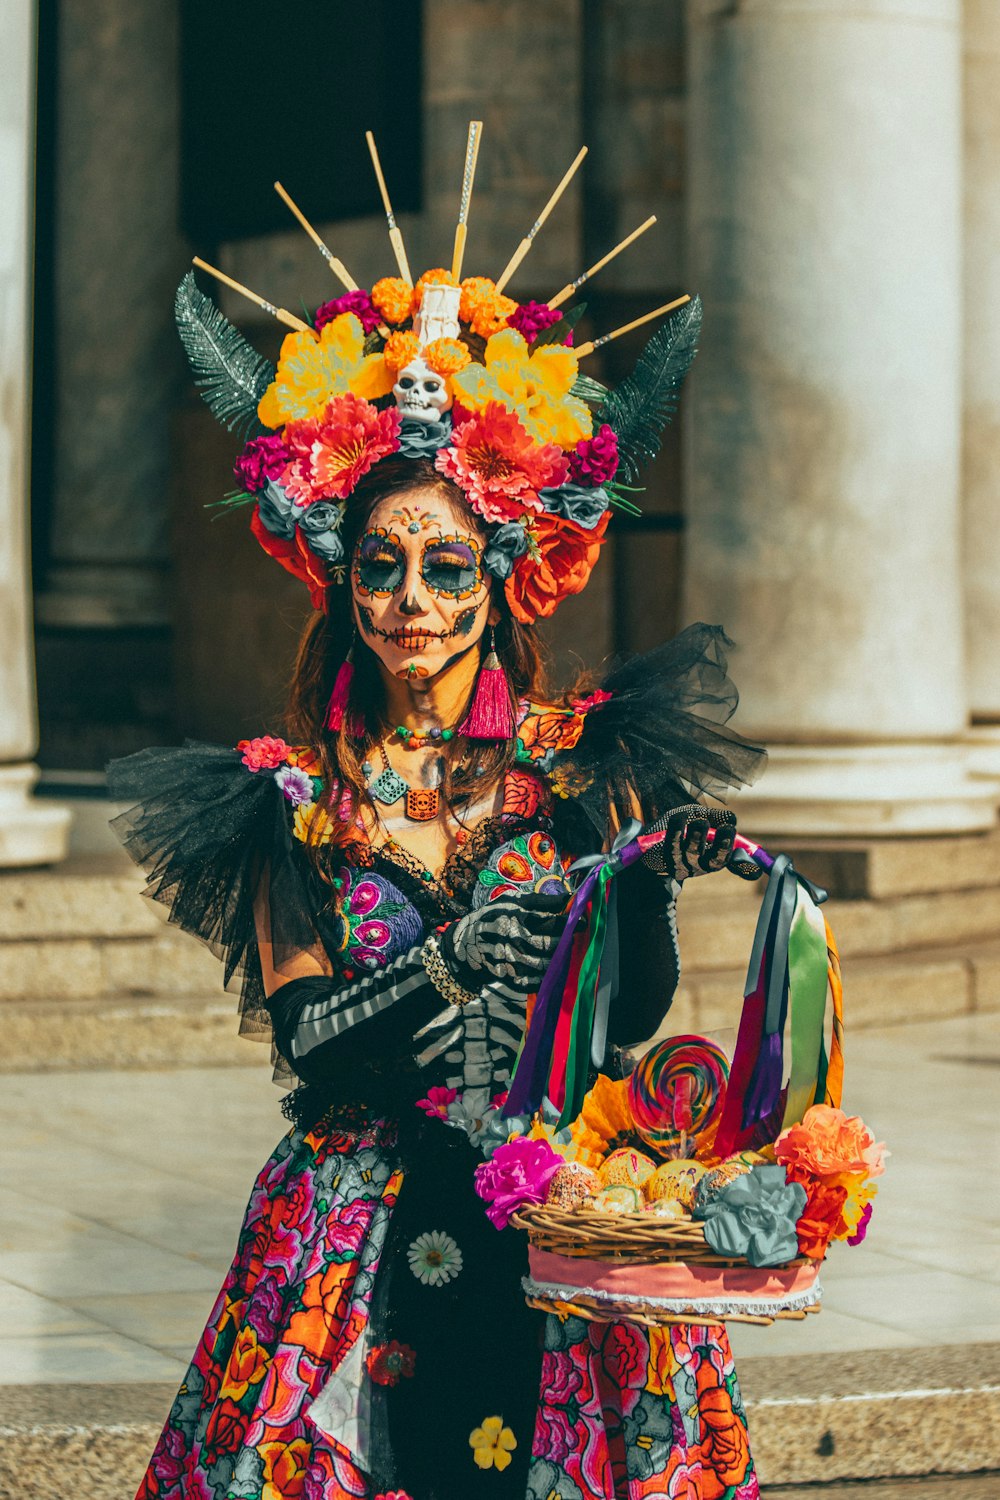 a woman in a colorful costume holding a basket